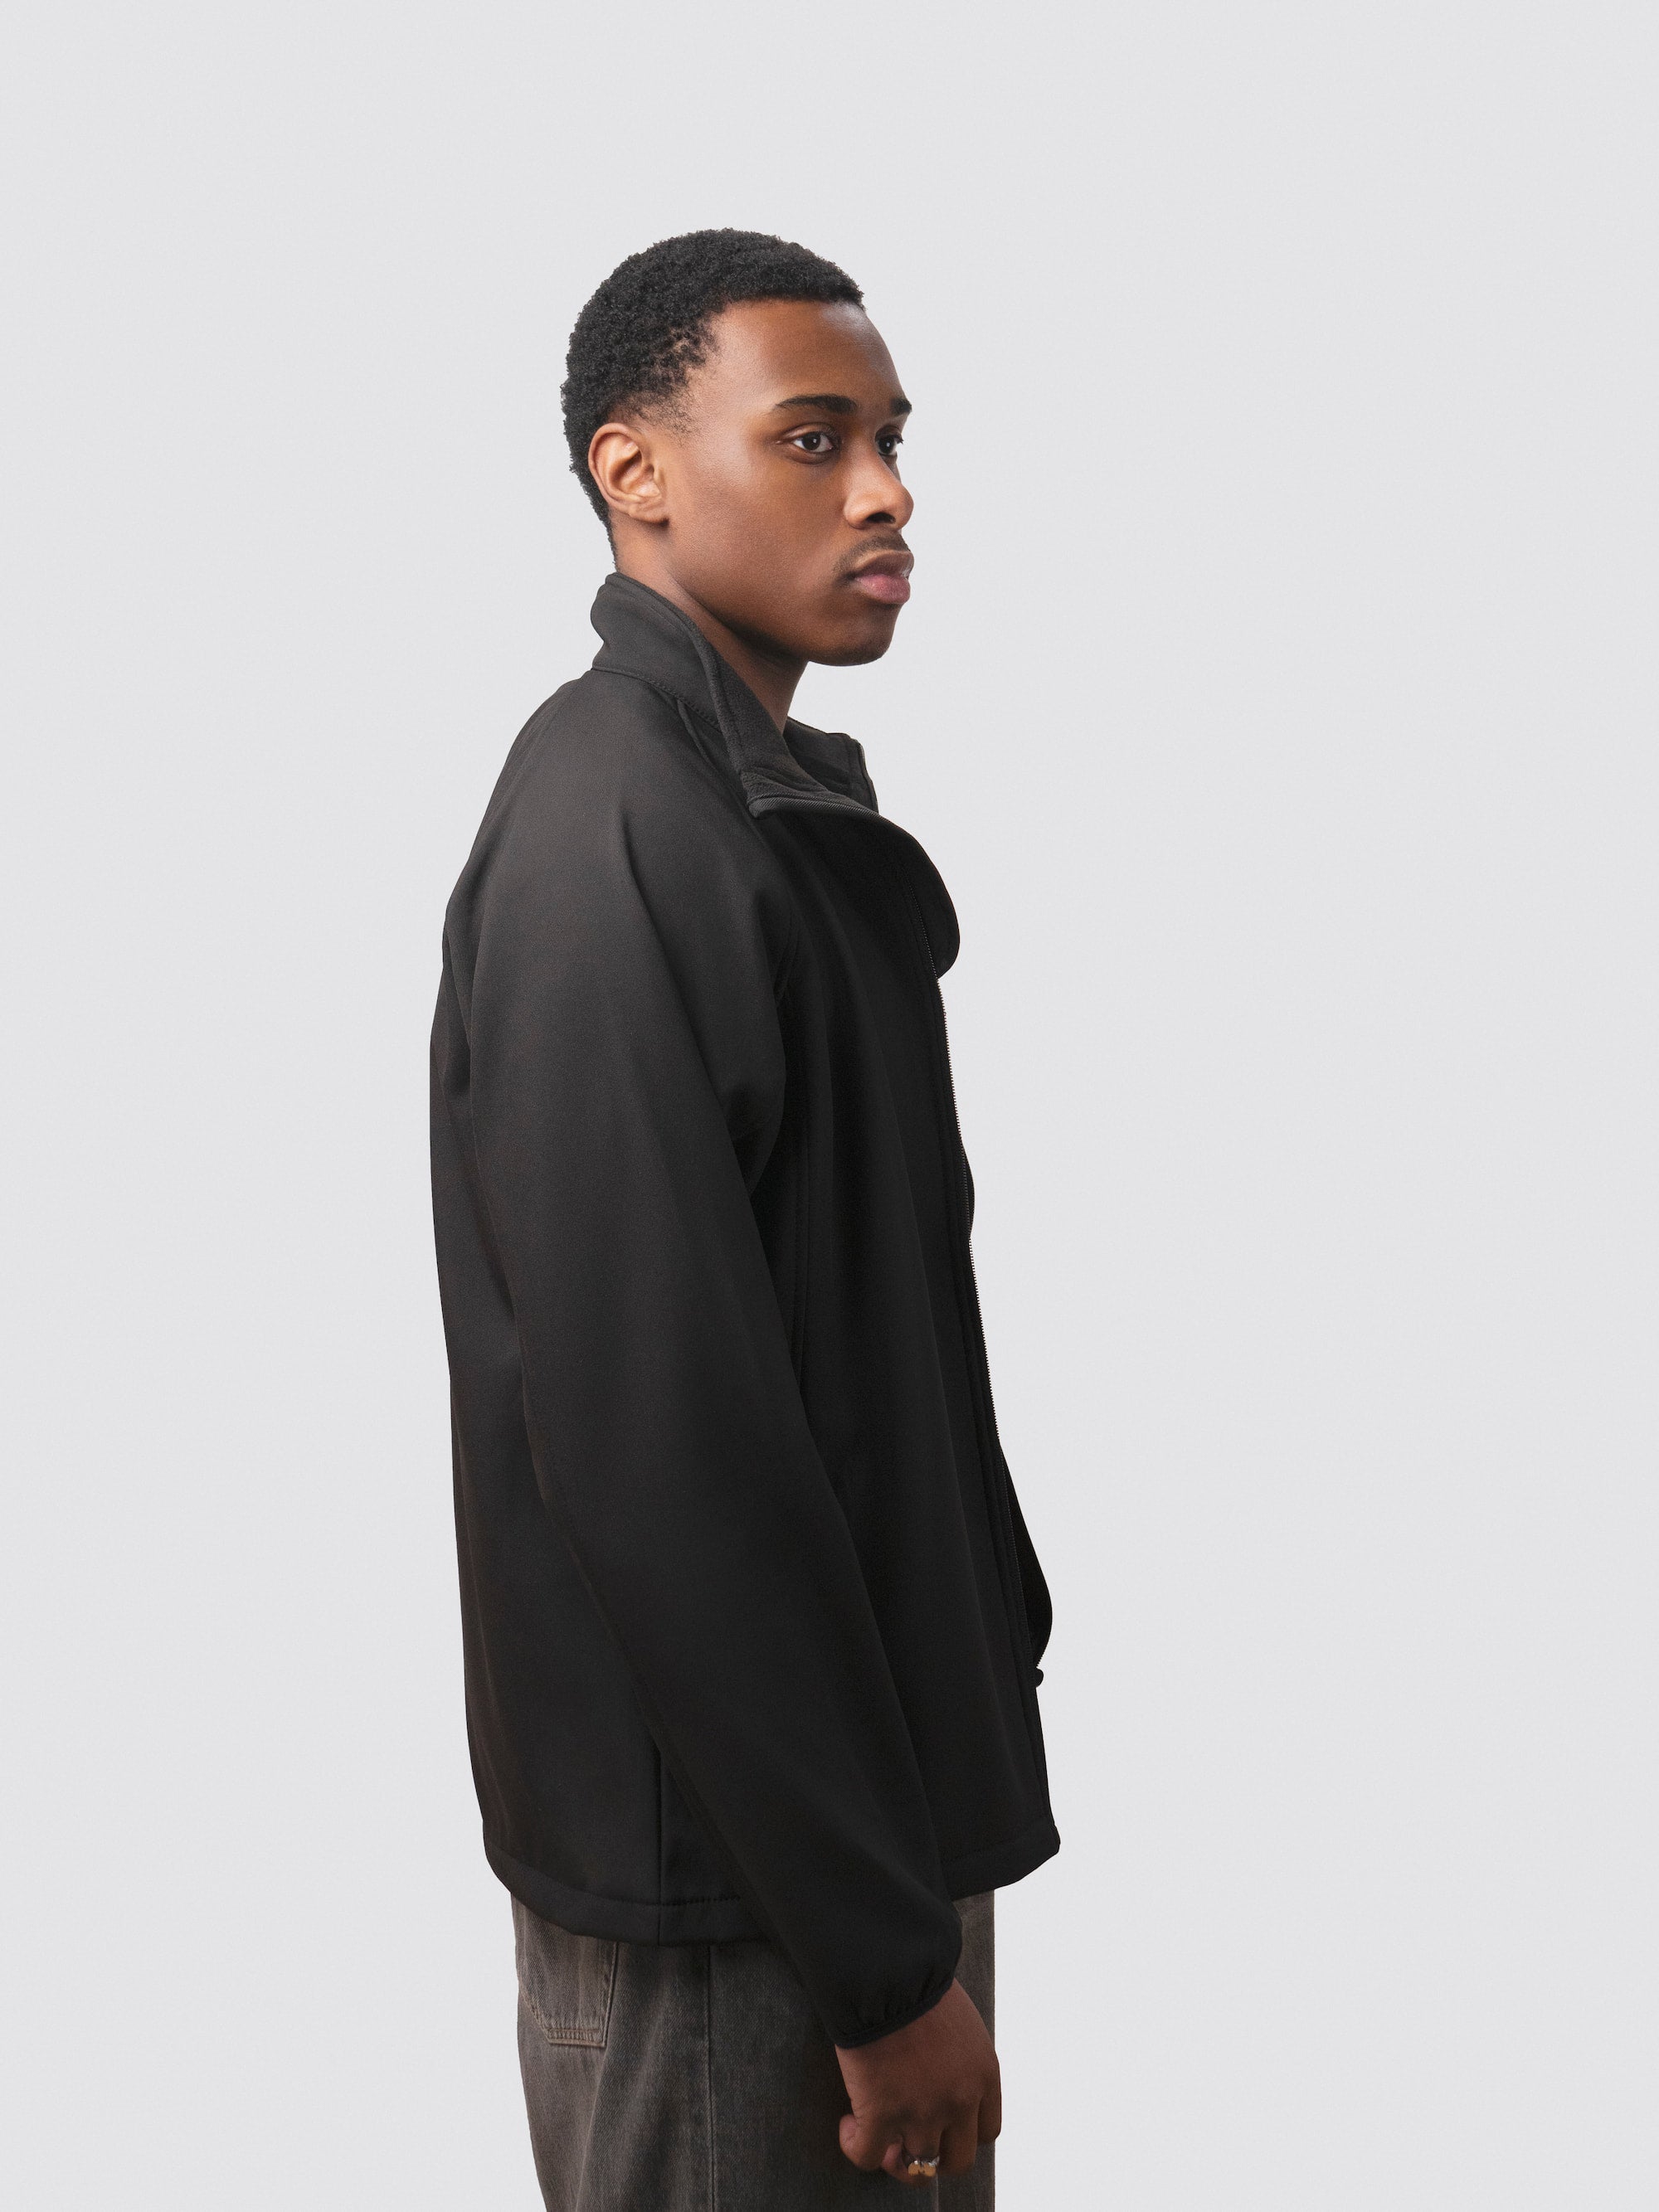 Black showerproof jacket, made from recycled plastic bottles